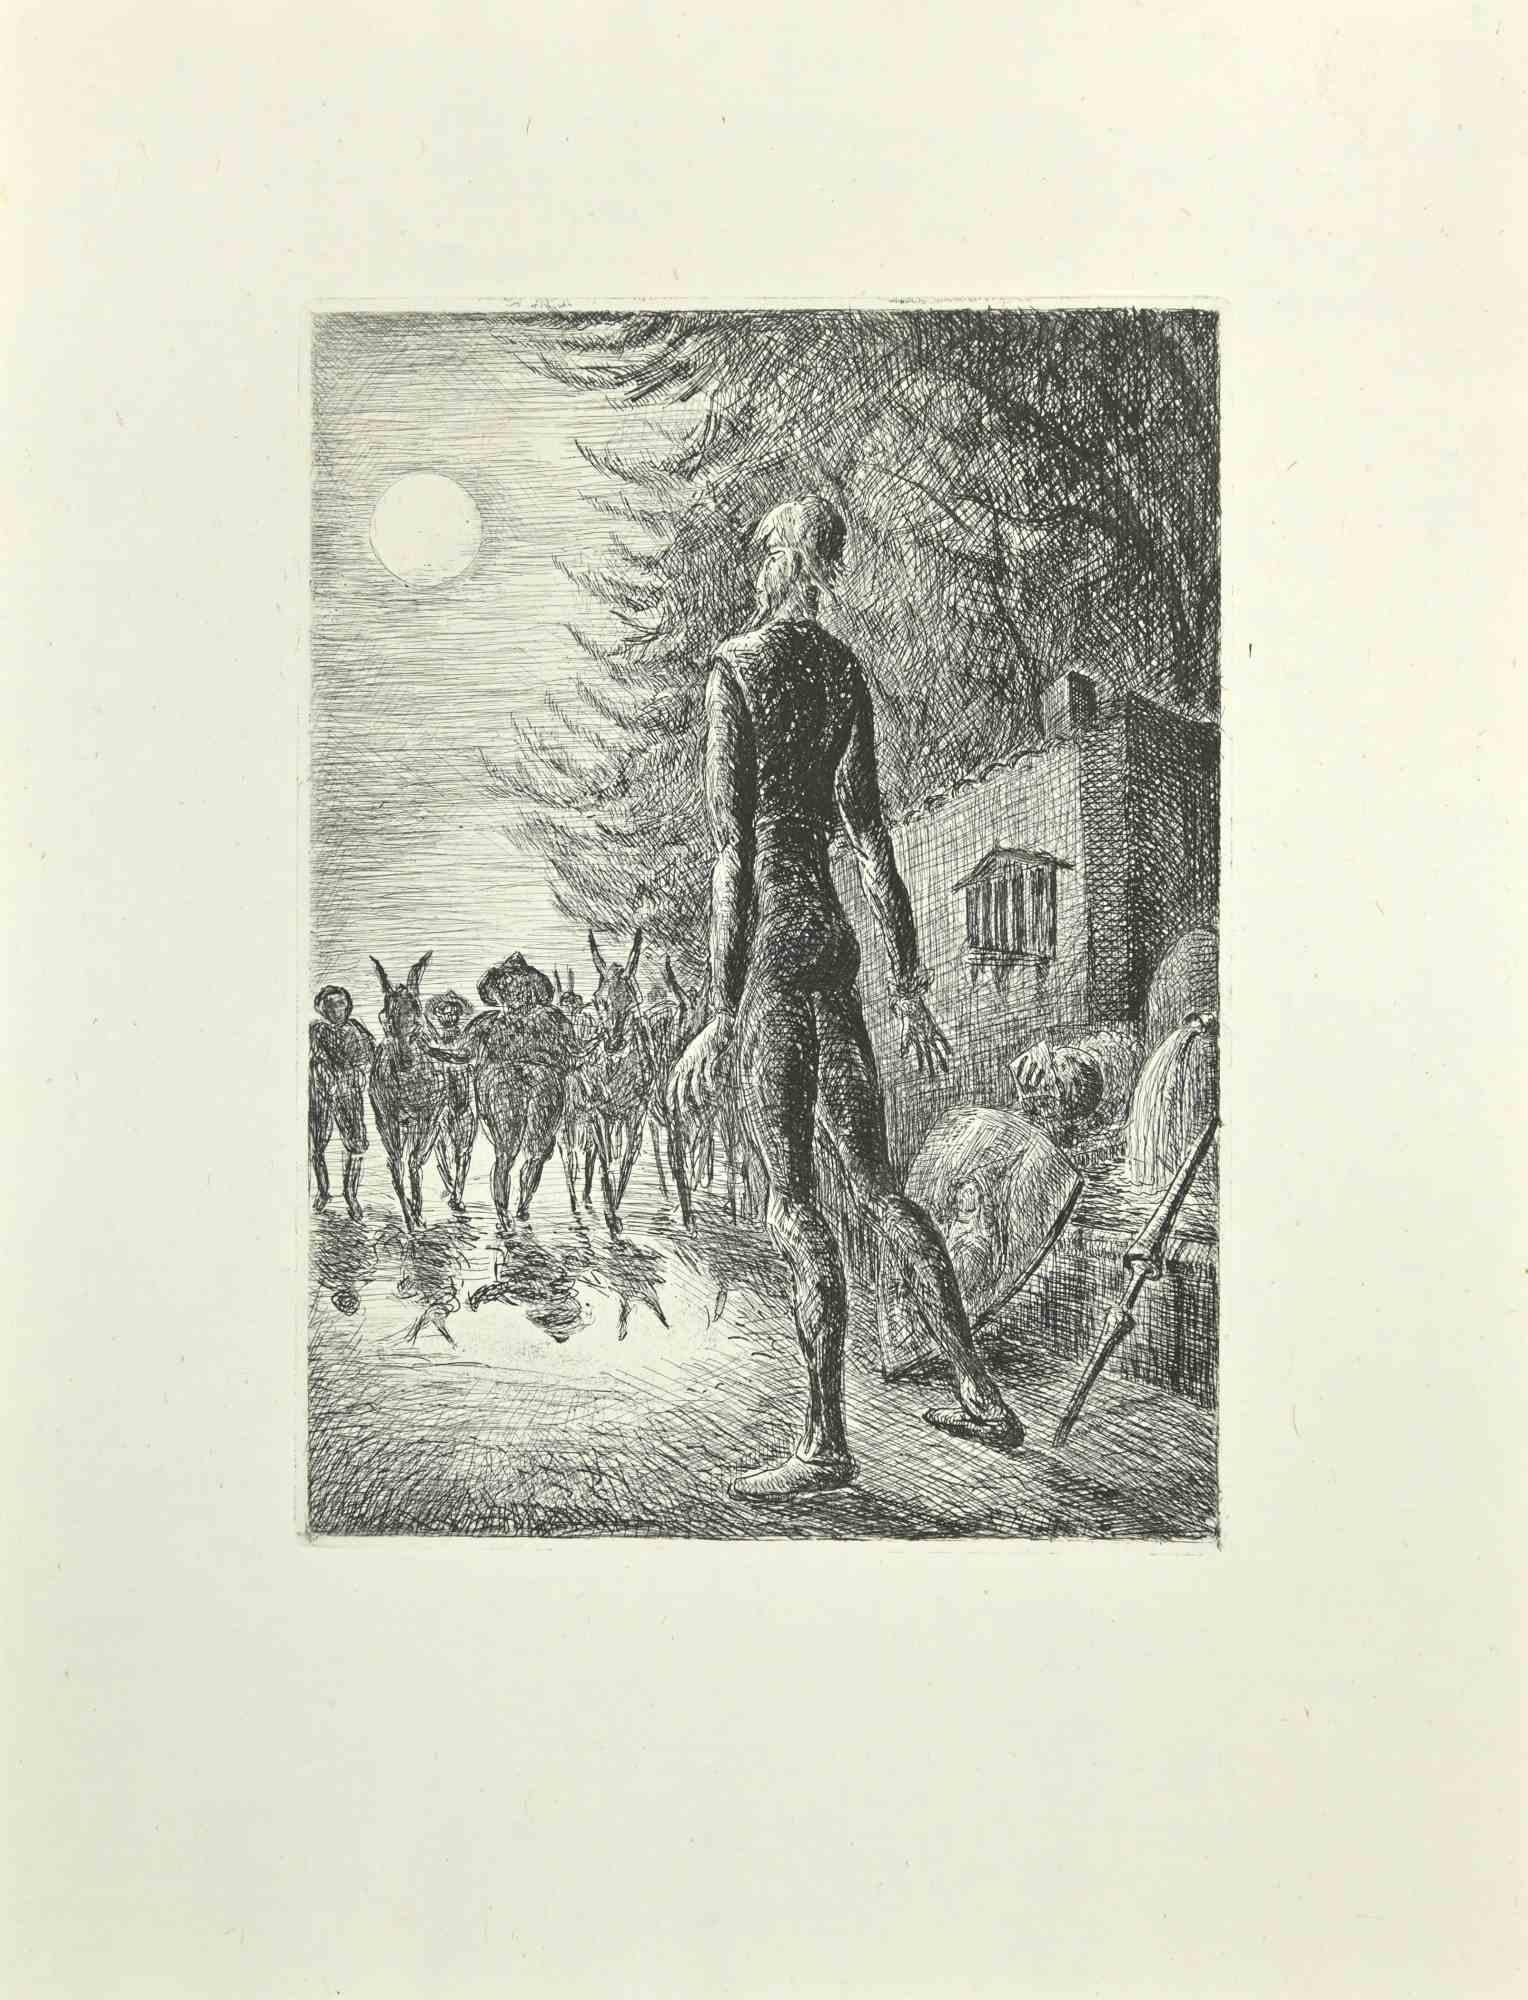 The Departure Don Quixote is an etching and drypoint print on ivory-colored China paper, realized by Wladyslaw Jahl in 1951.

It belongs to a limited edition of 125 specimens.

Good conditions.

The artwork represents a visual scene from Don Quixote